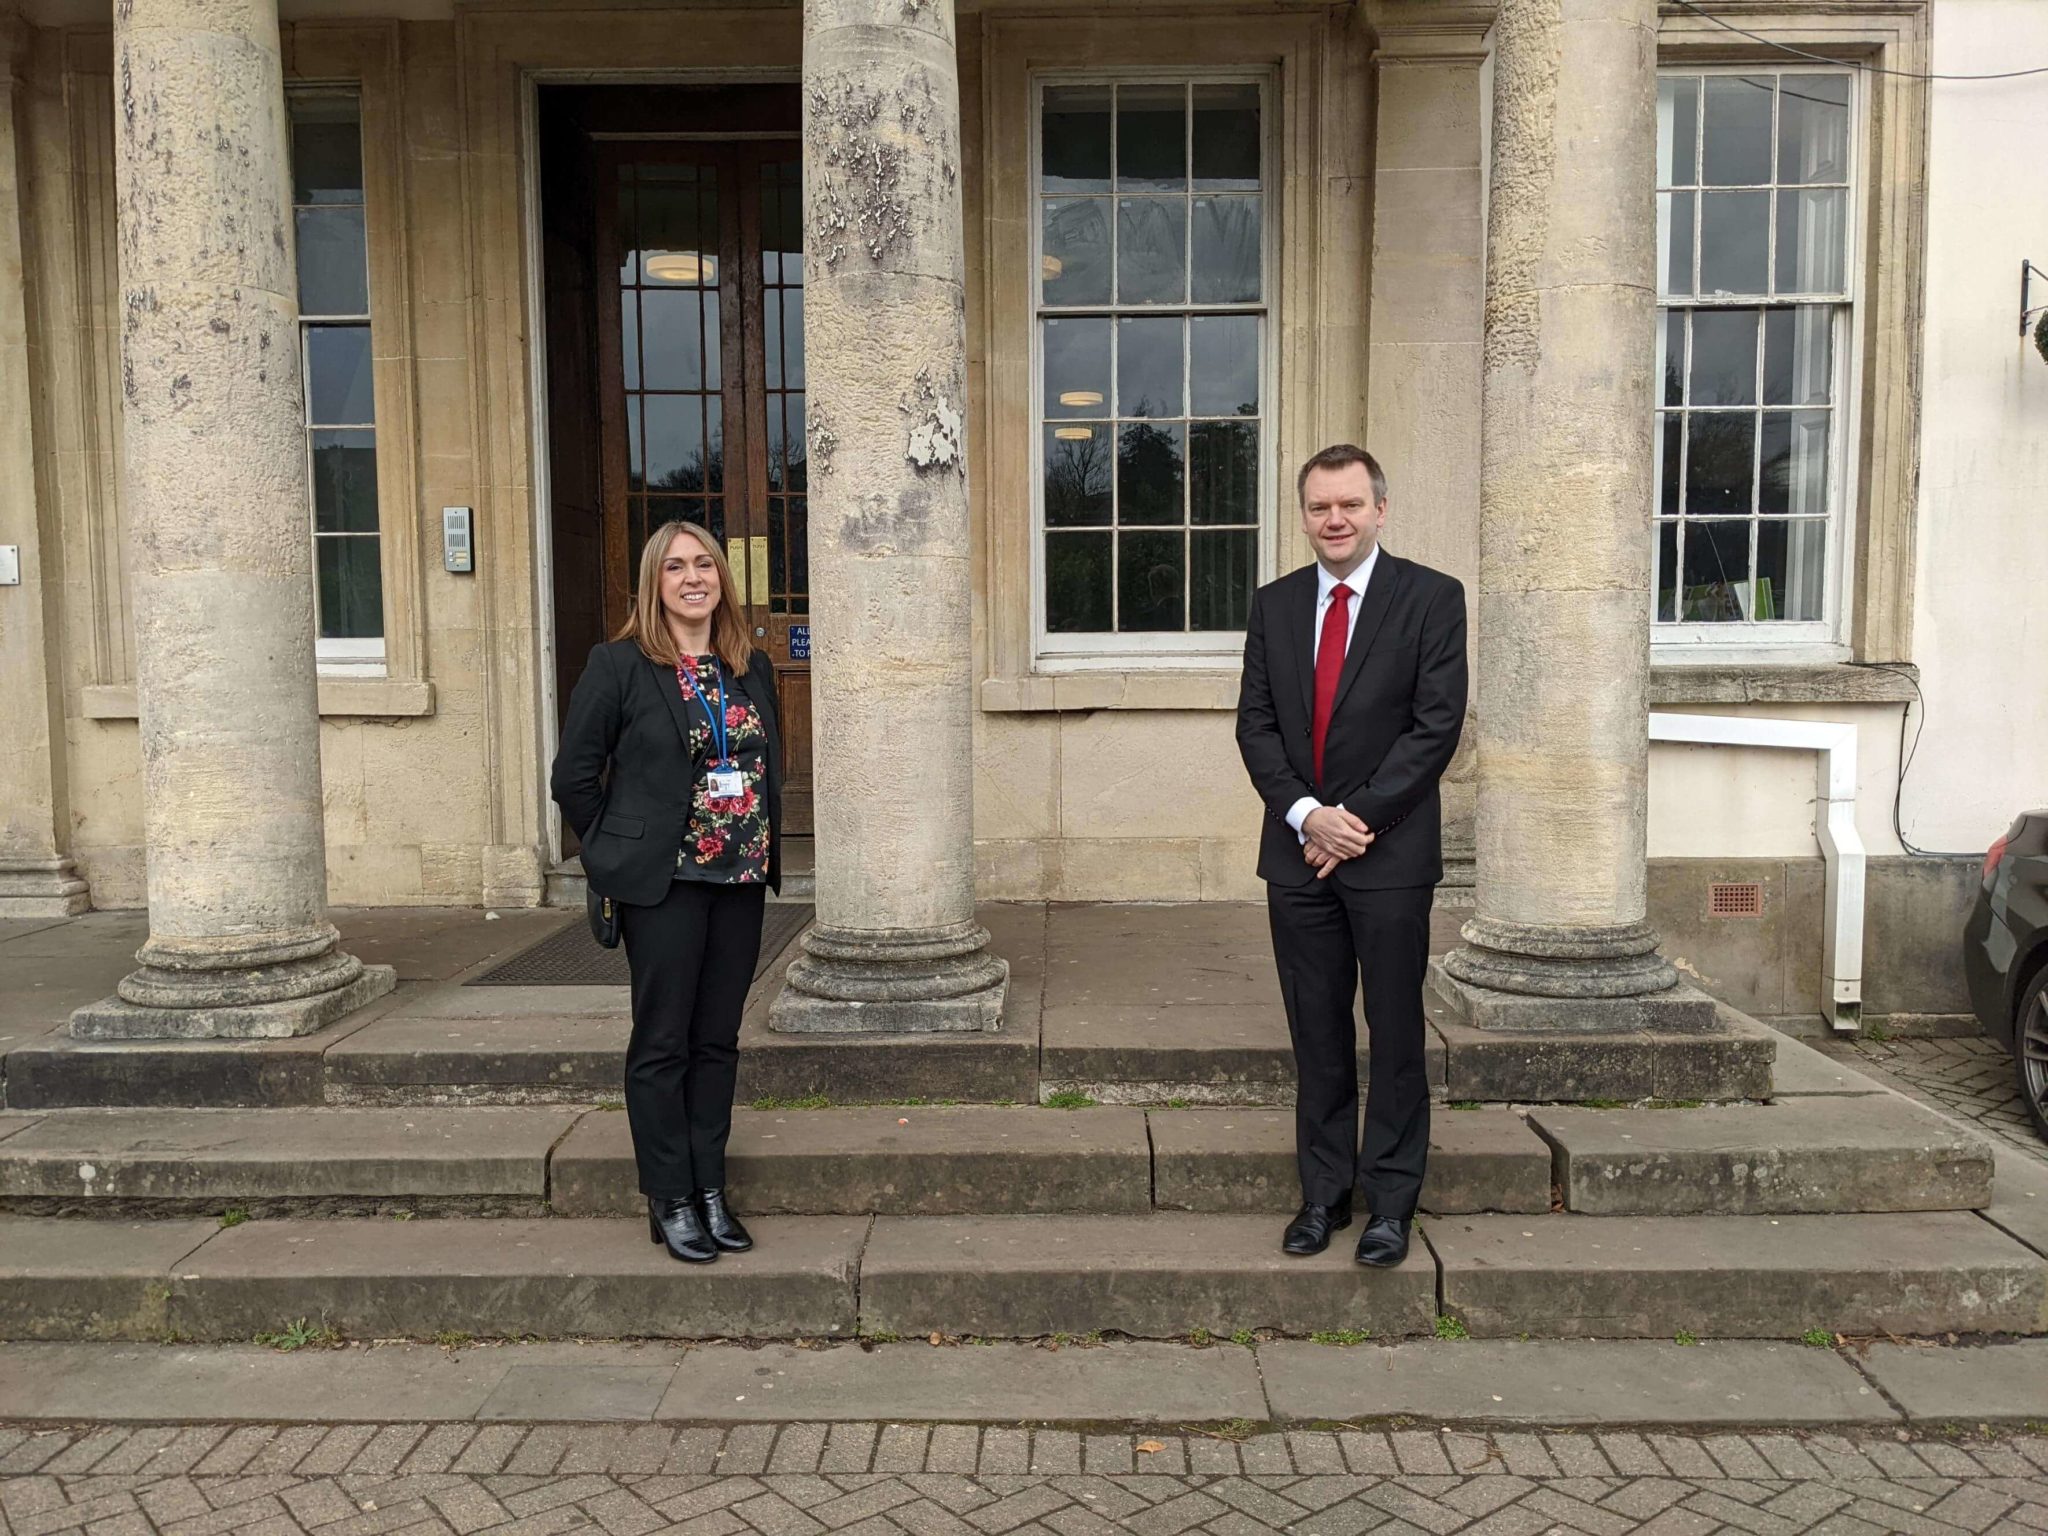 Emma Read, assistant headteacher, and Nick Thomas-Symonds at St Alban's RC School